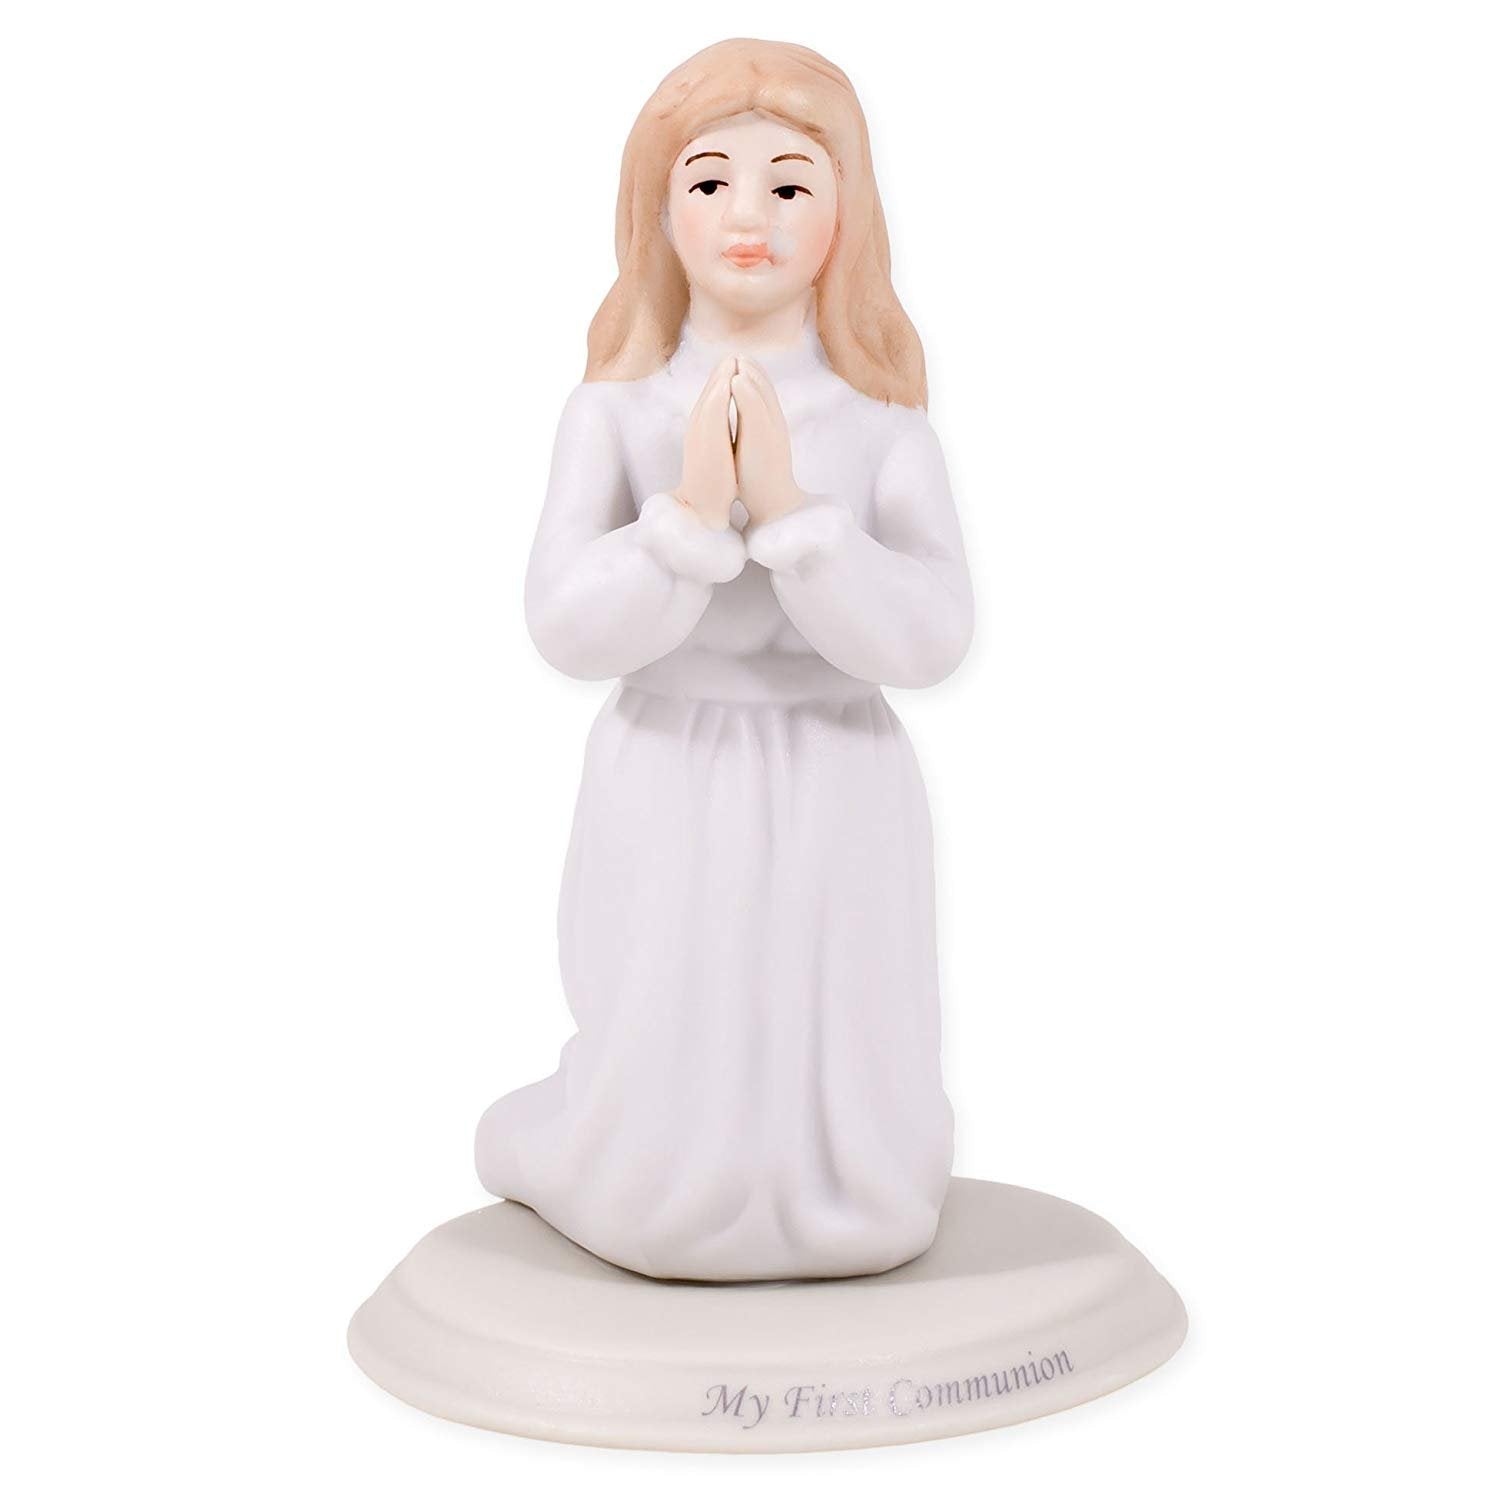 Pacific Giftware First Communion Girl Praying on His Knees Statue Fine Porcelain Figurine, 5.25" H